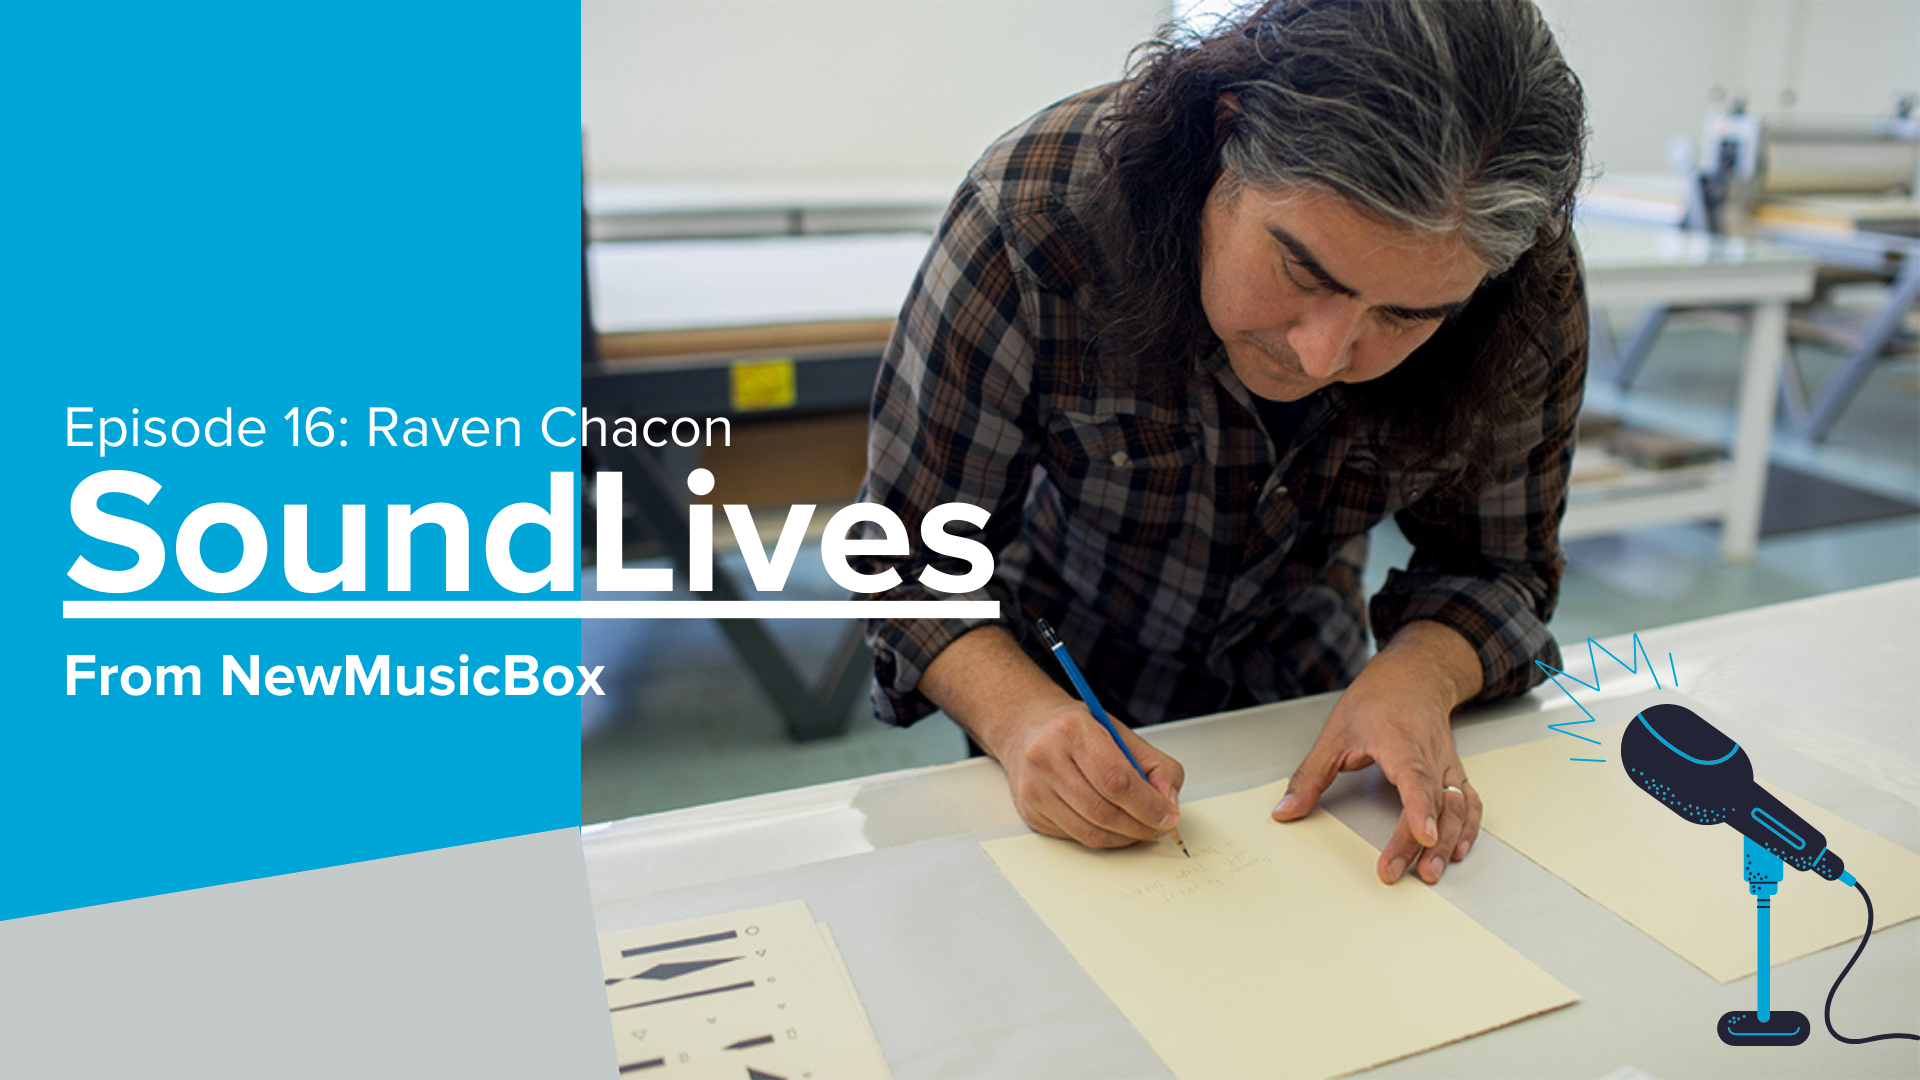 Banner for the Raven Chacon episode of SoundLives featuring a photo of Raven writing music on a piece of score paper.